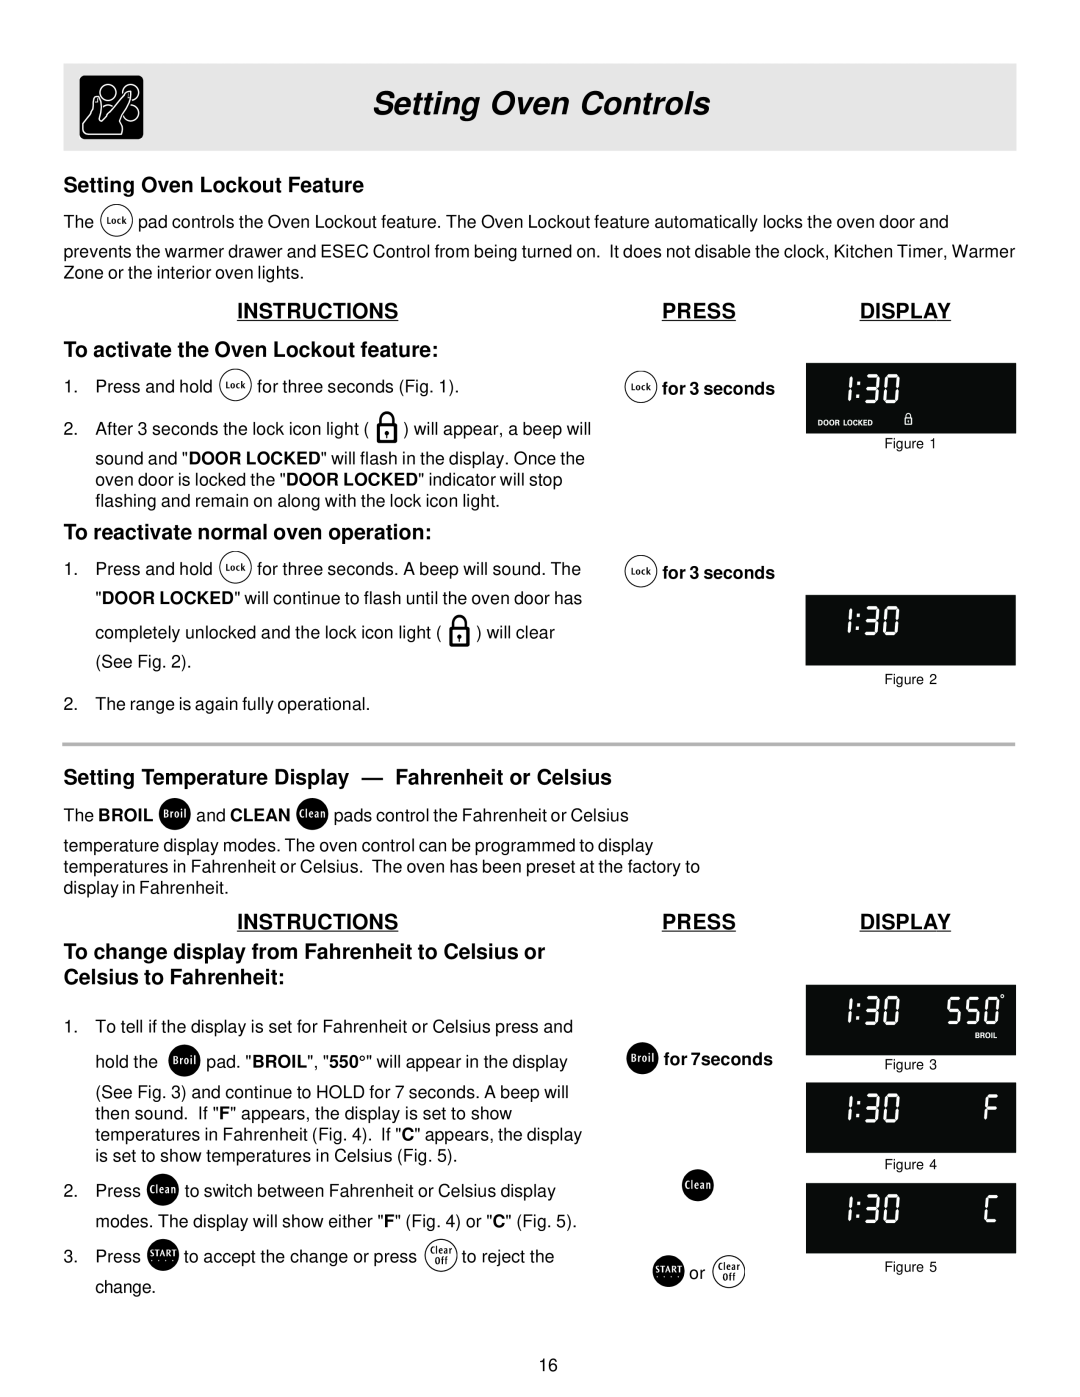 Frigidaire ES400 Setting Oven Lockout Feature, INSTRUCTIONS To activate the Oven Lockout feature, Pressdisplay, Display 